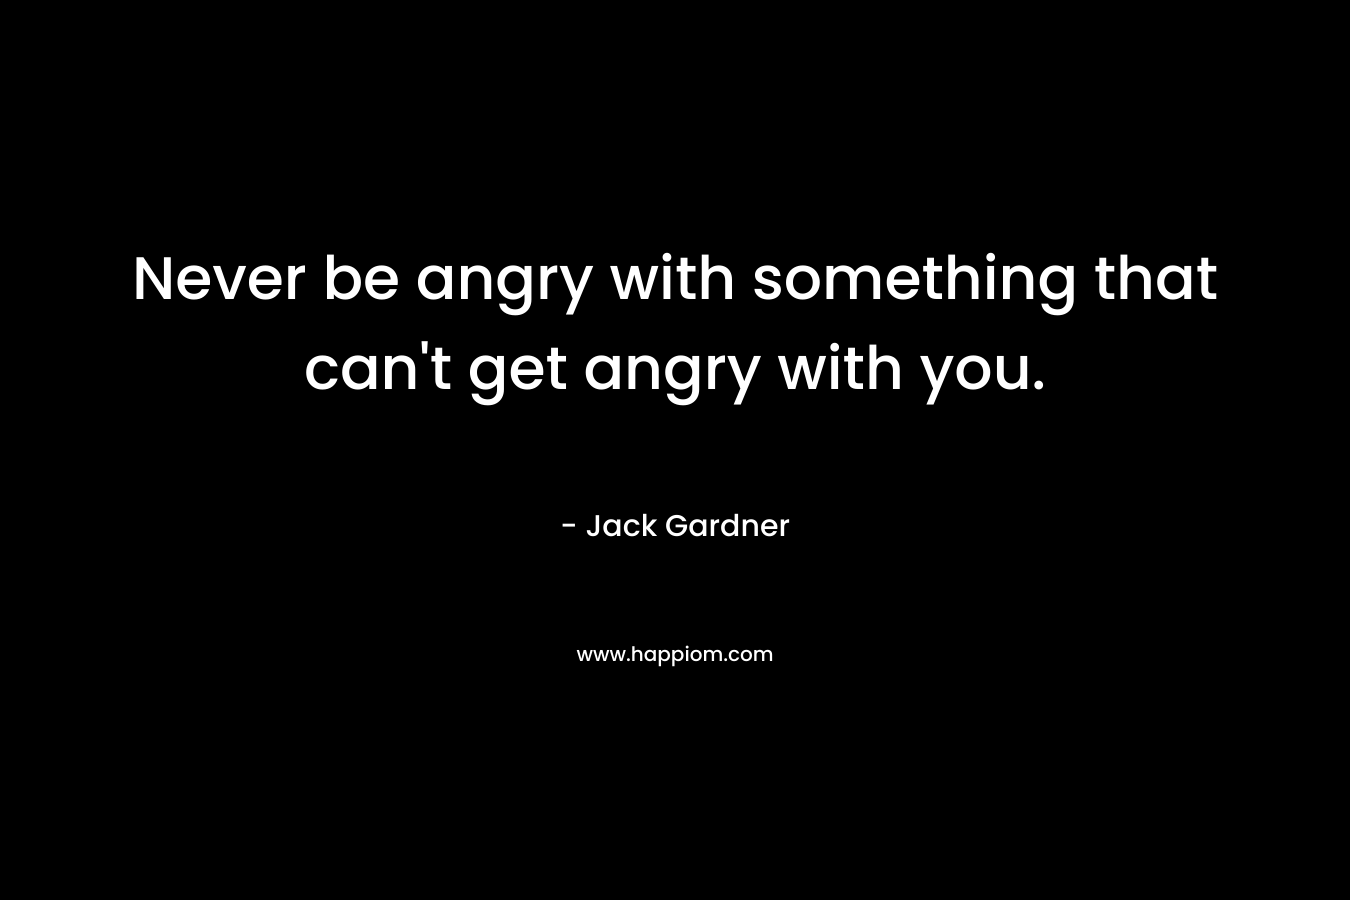 Never be angry with something that can't get angry with you.